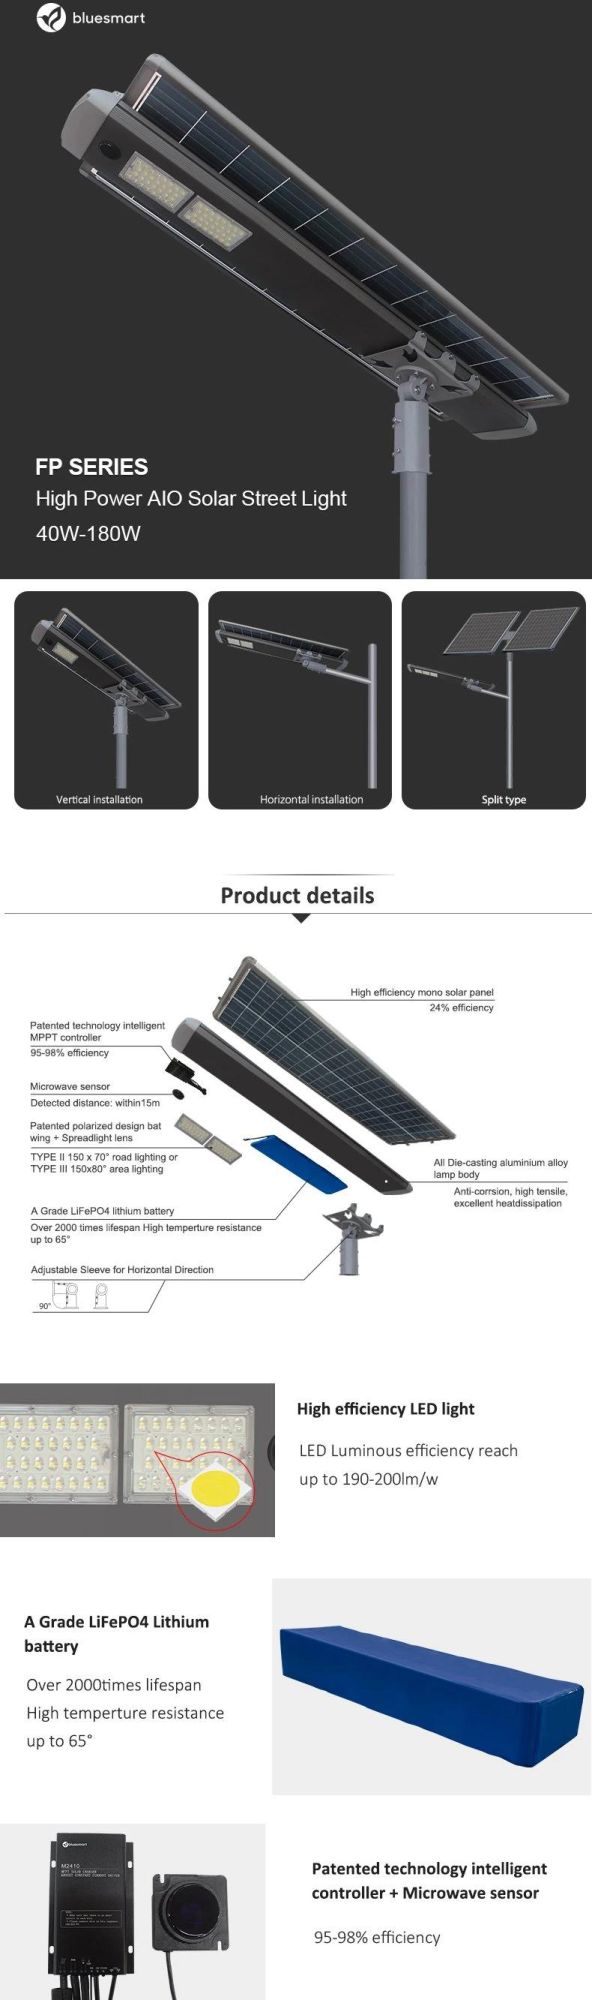 Solar Products Solar Street Lights All in One Integral High Power LED Solar Street Light with LiFePO4 Batery